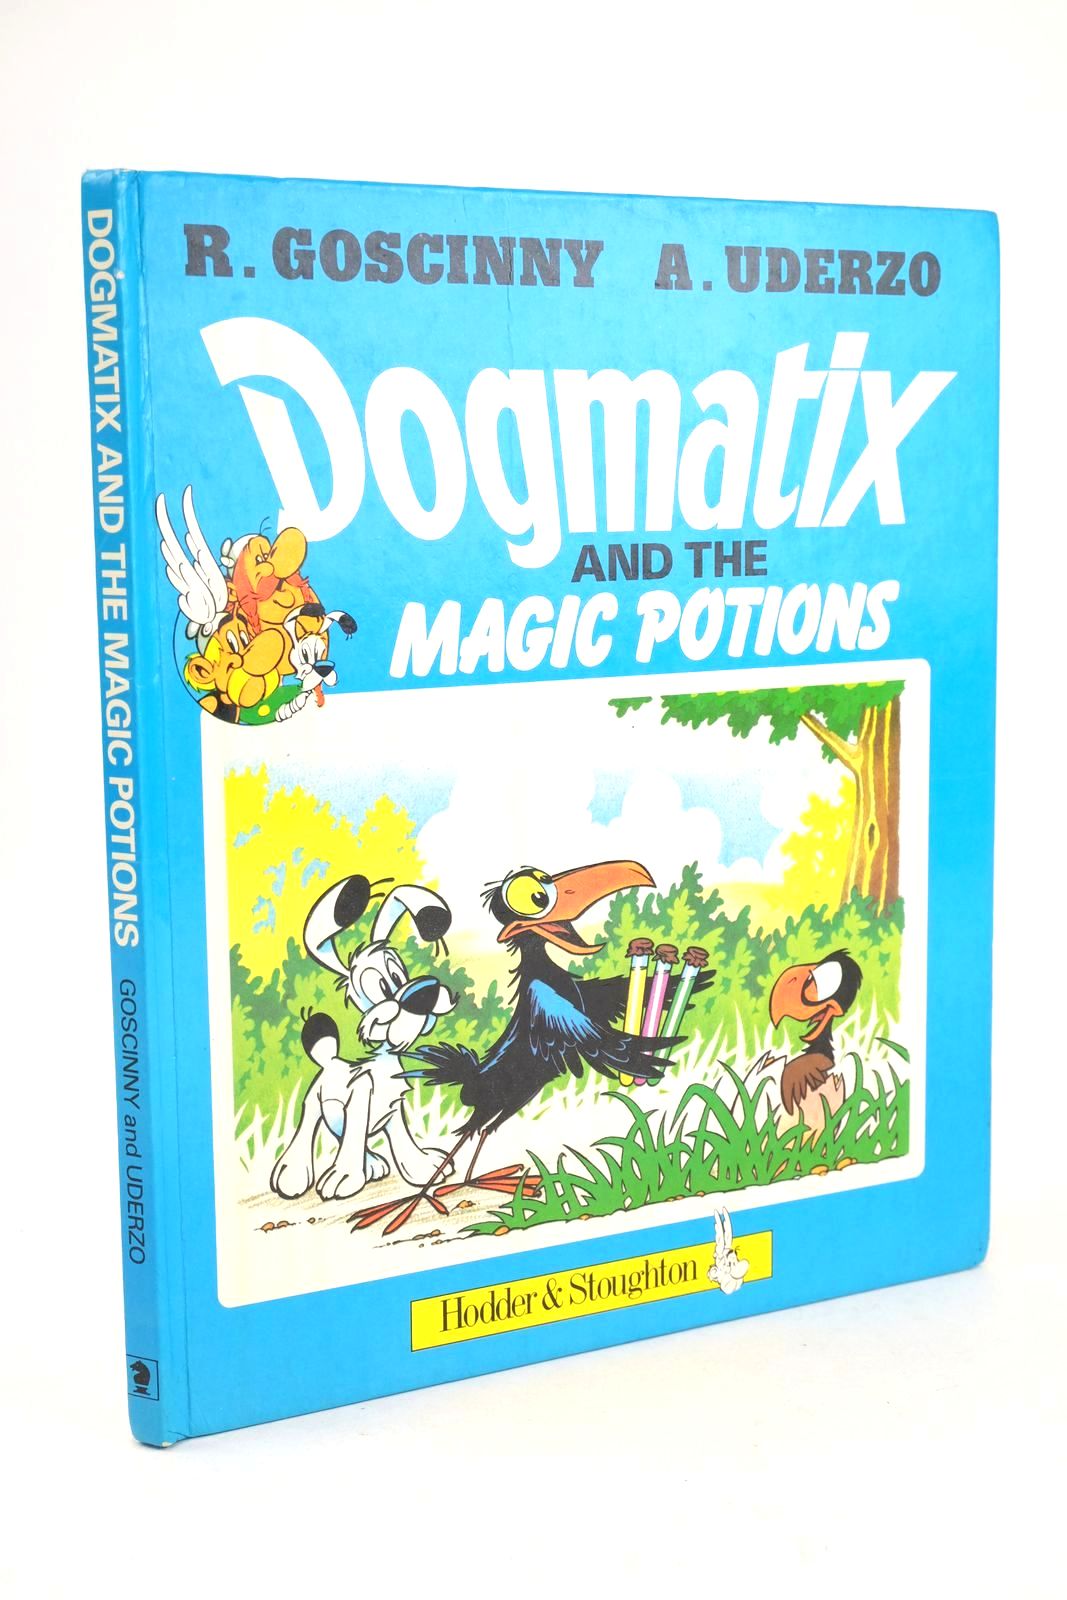 Photo of DOGMATIX AND THE MAGIC POTIONS written by Goscinny, Rene illustrated by Uderzo, Albert published by Hodder &amp; Stoughton (STOCK CODE: 1325610)  for sale by Stella & Rose's Books